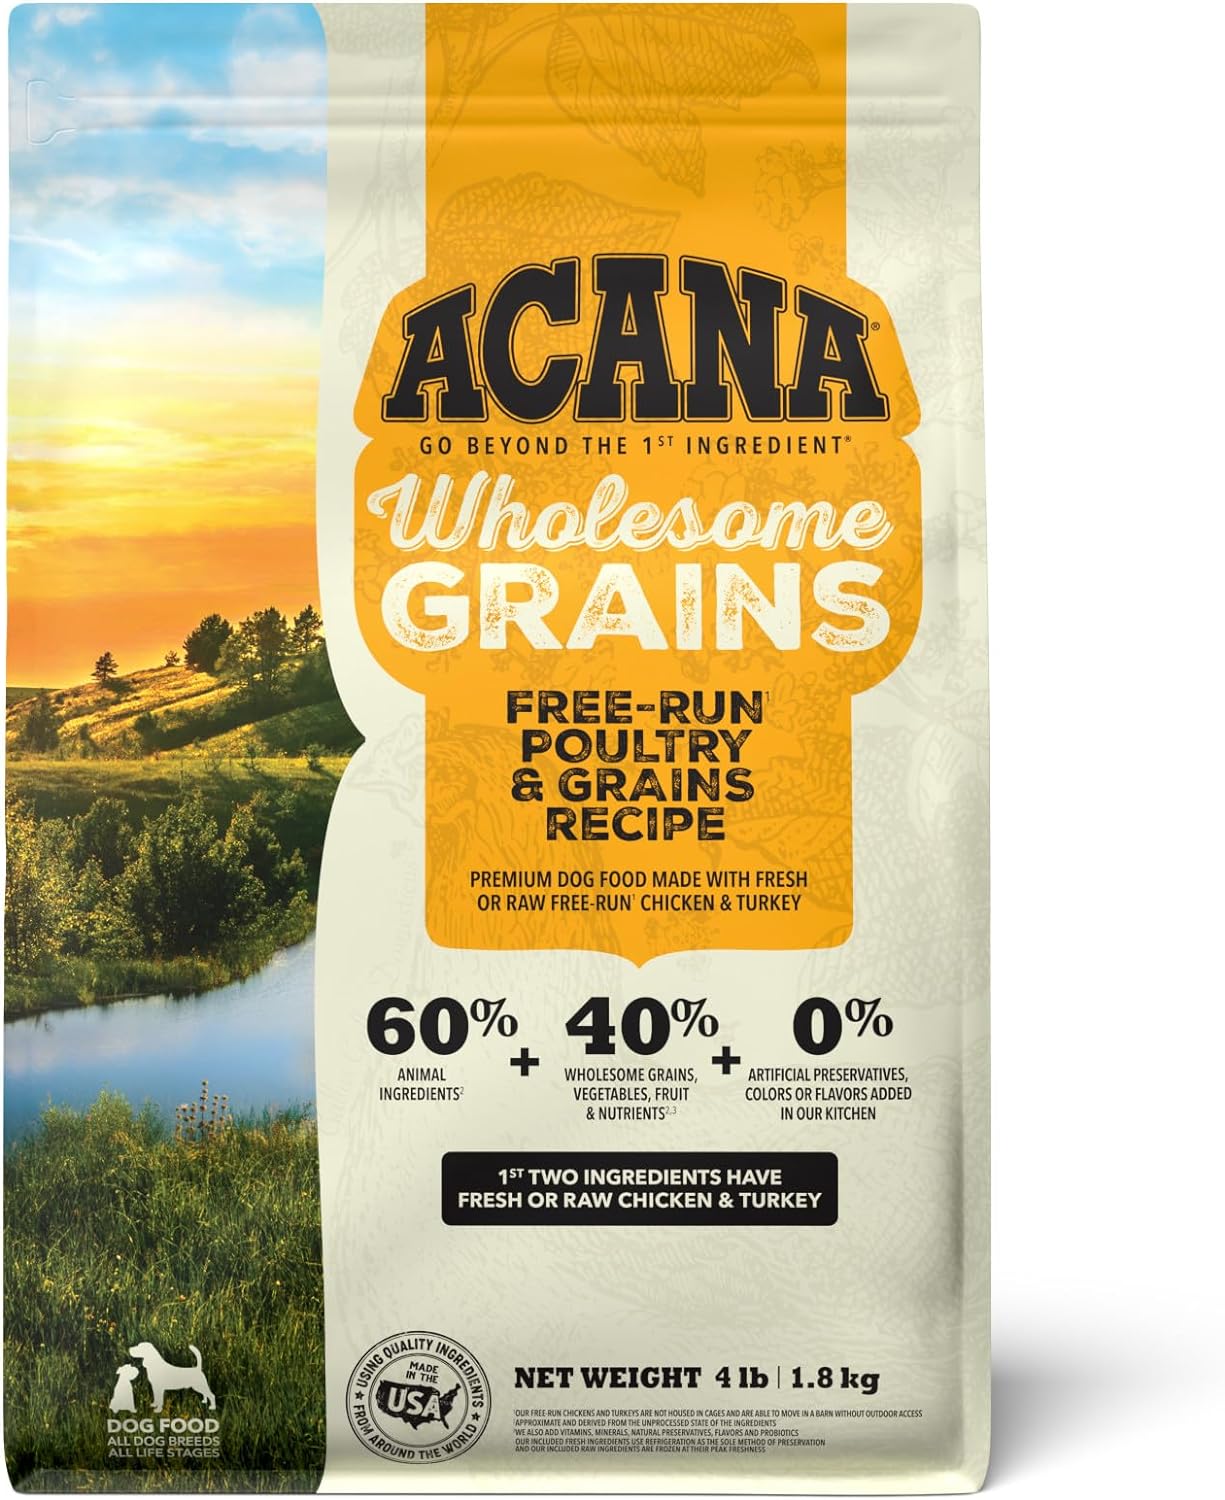 ACANA Wholesome Grains Dry Dog Food, Free-Run Poultry, Real Chicken & Turkey and Eggs Dog Food Recipe, 4lb